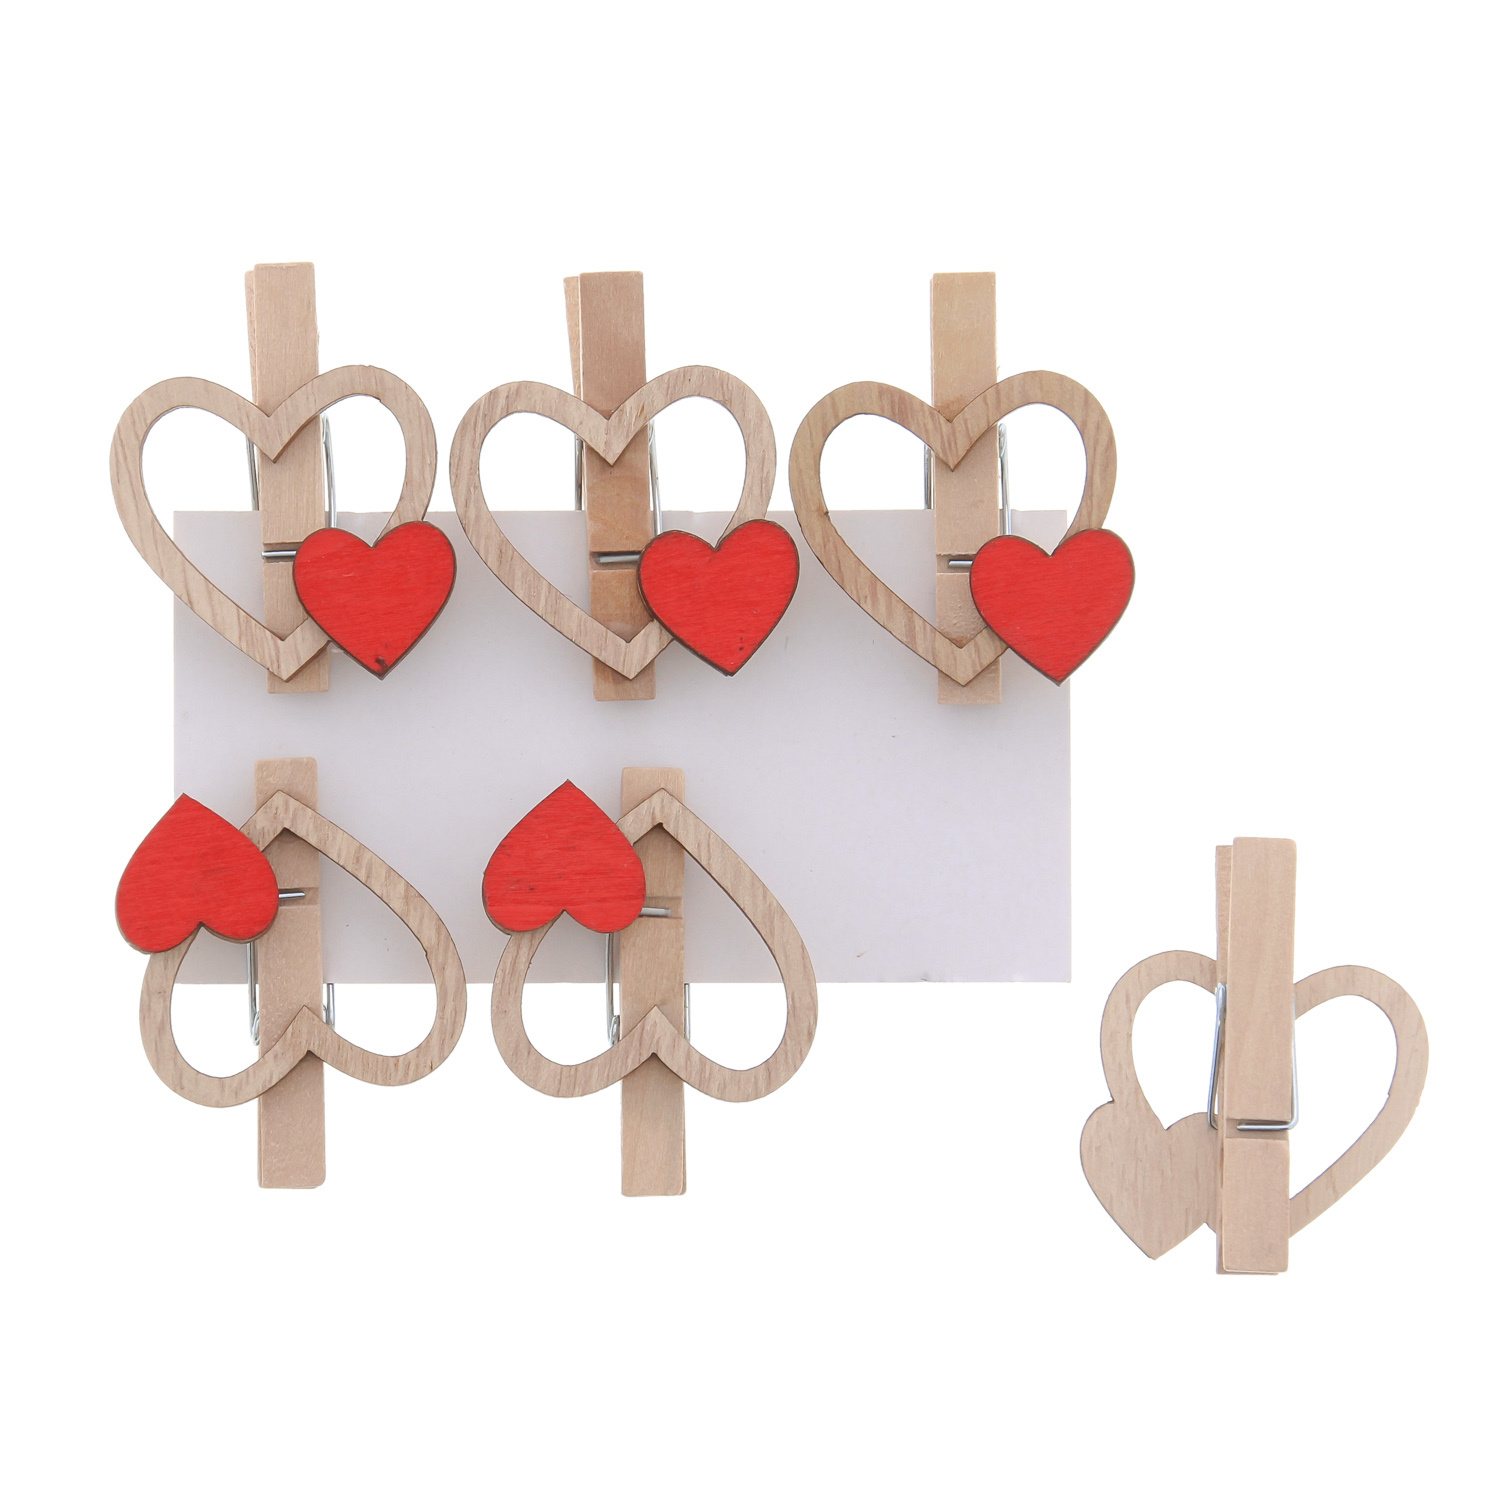 Clip open heart natural + small heart red- 35*45*13mm - 36 pieces